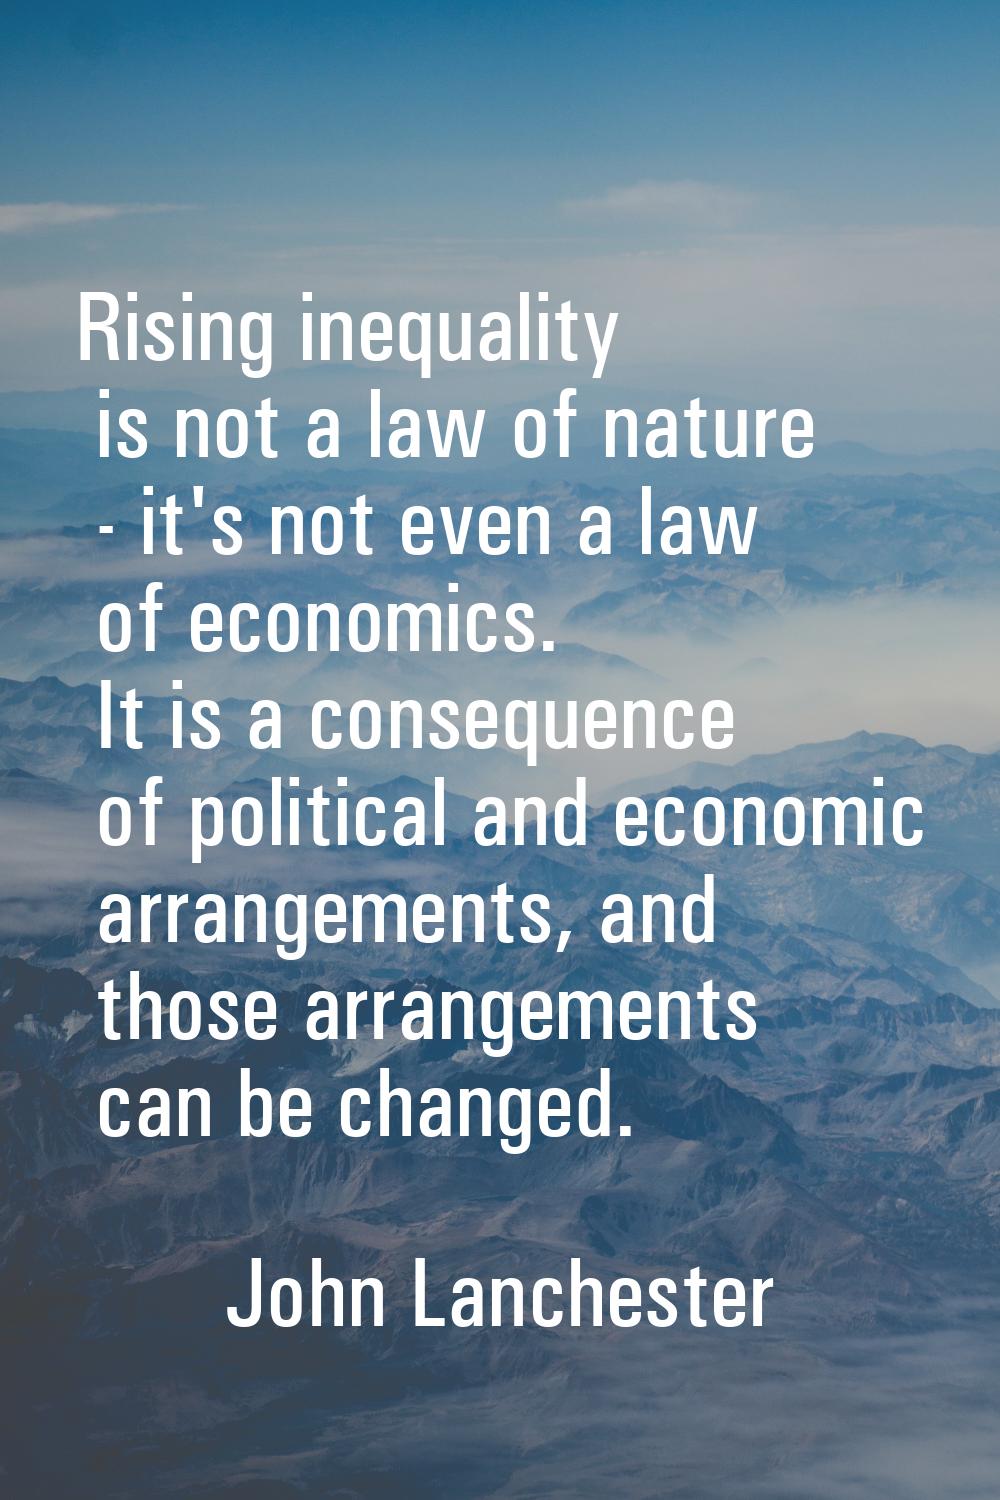 Rising inequality is not a law of nature - it's not even a law of economics. It is a consequence of